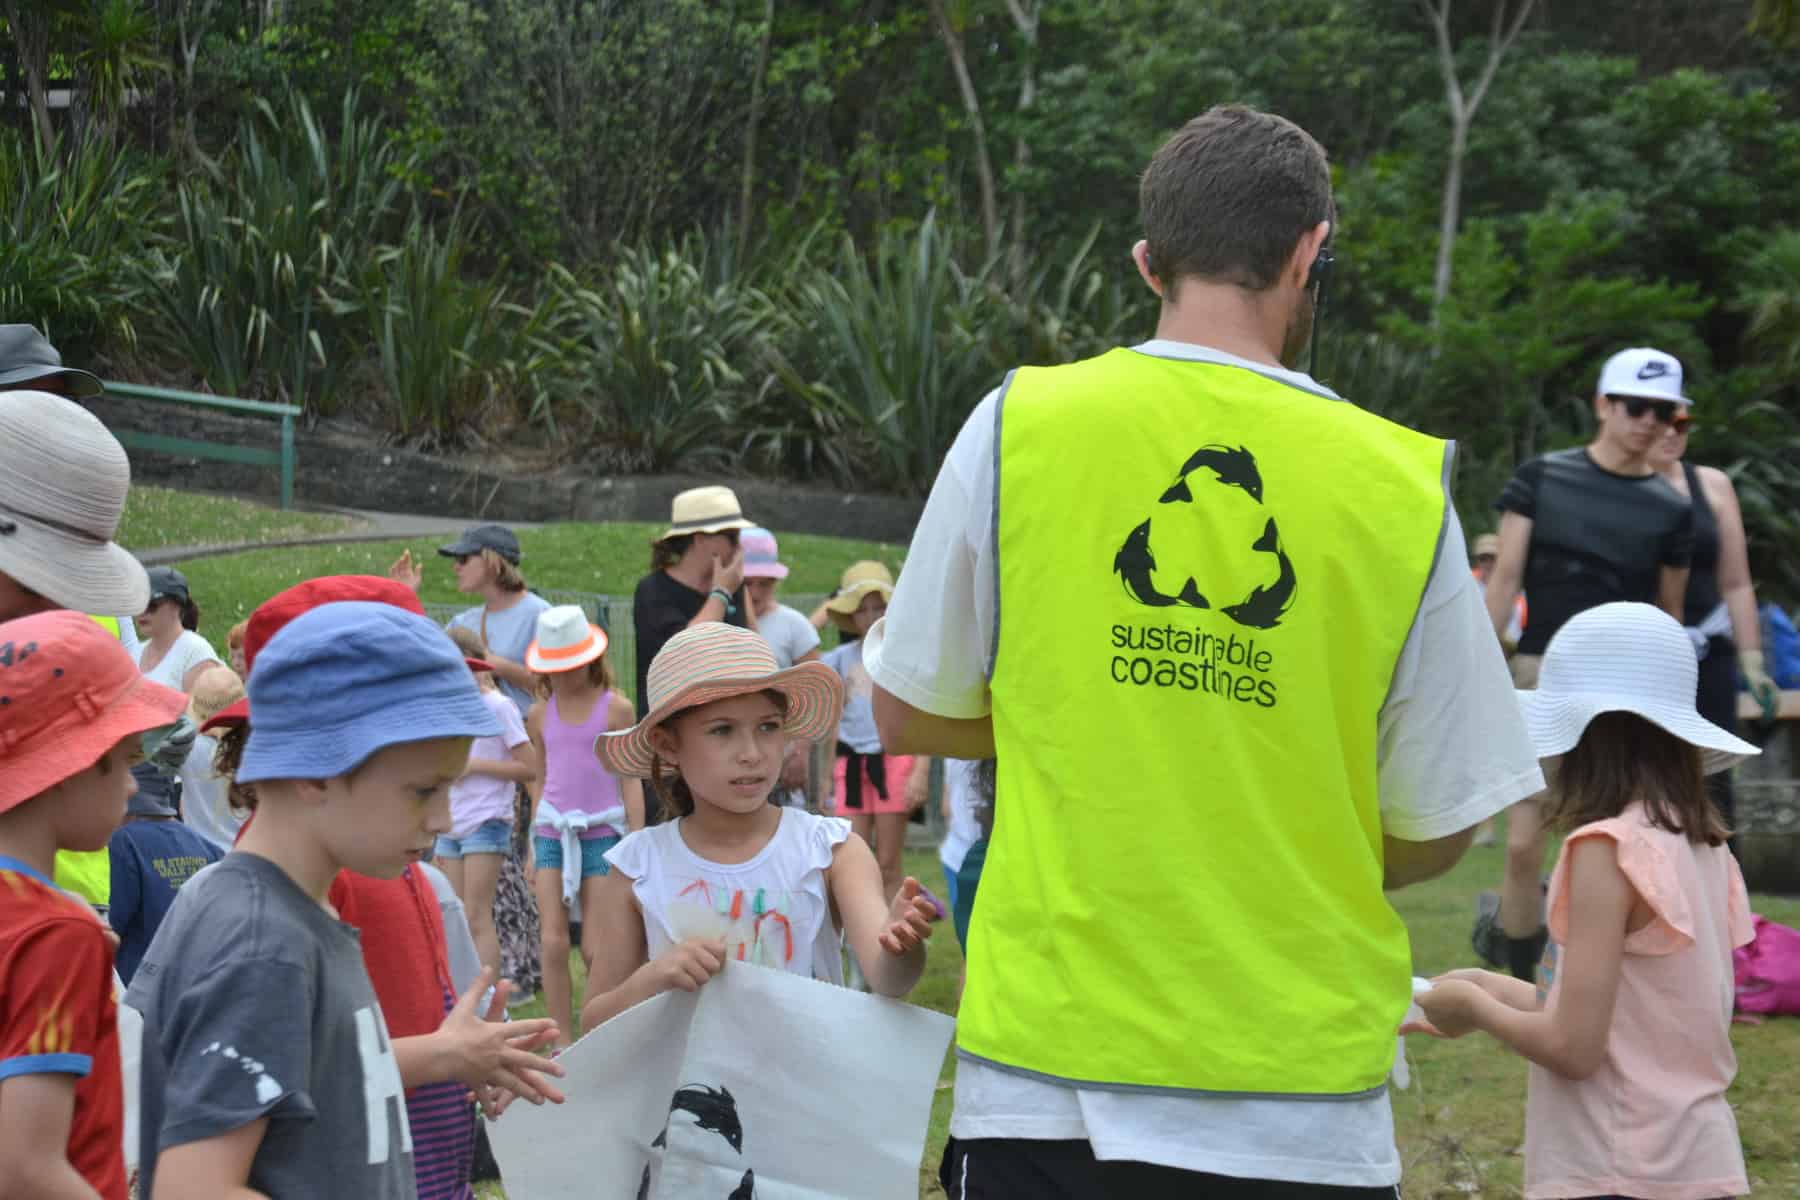 School children helping with clean up